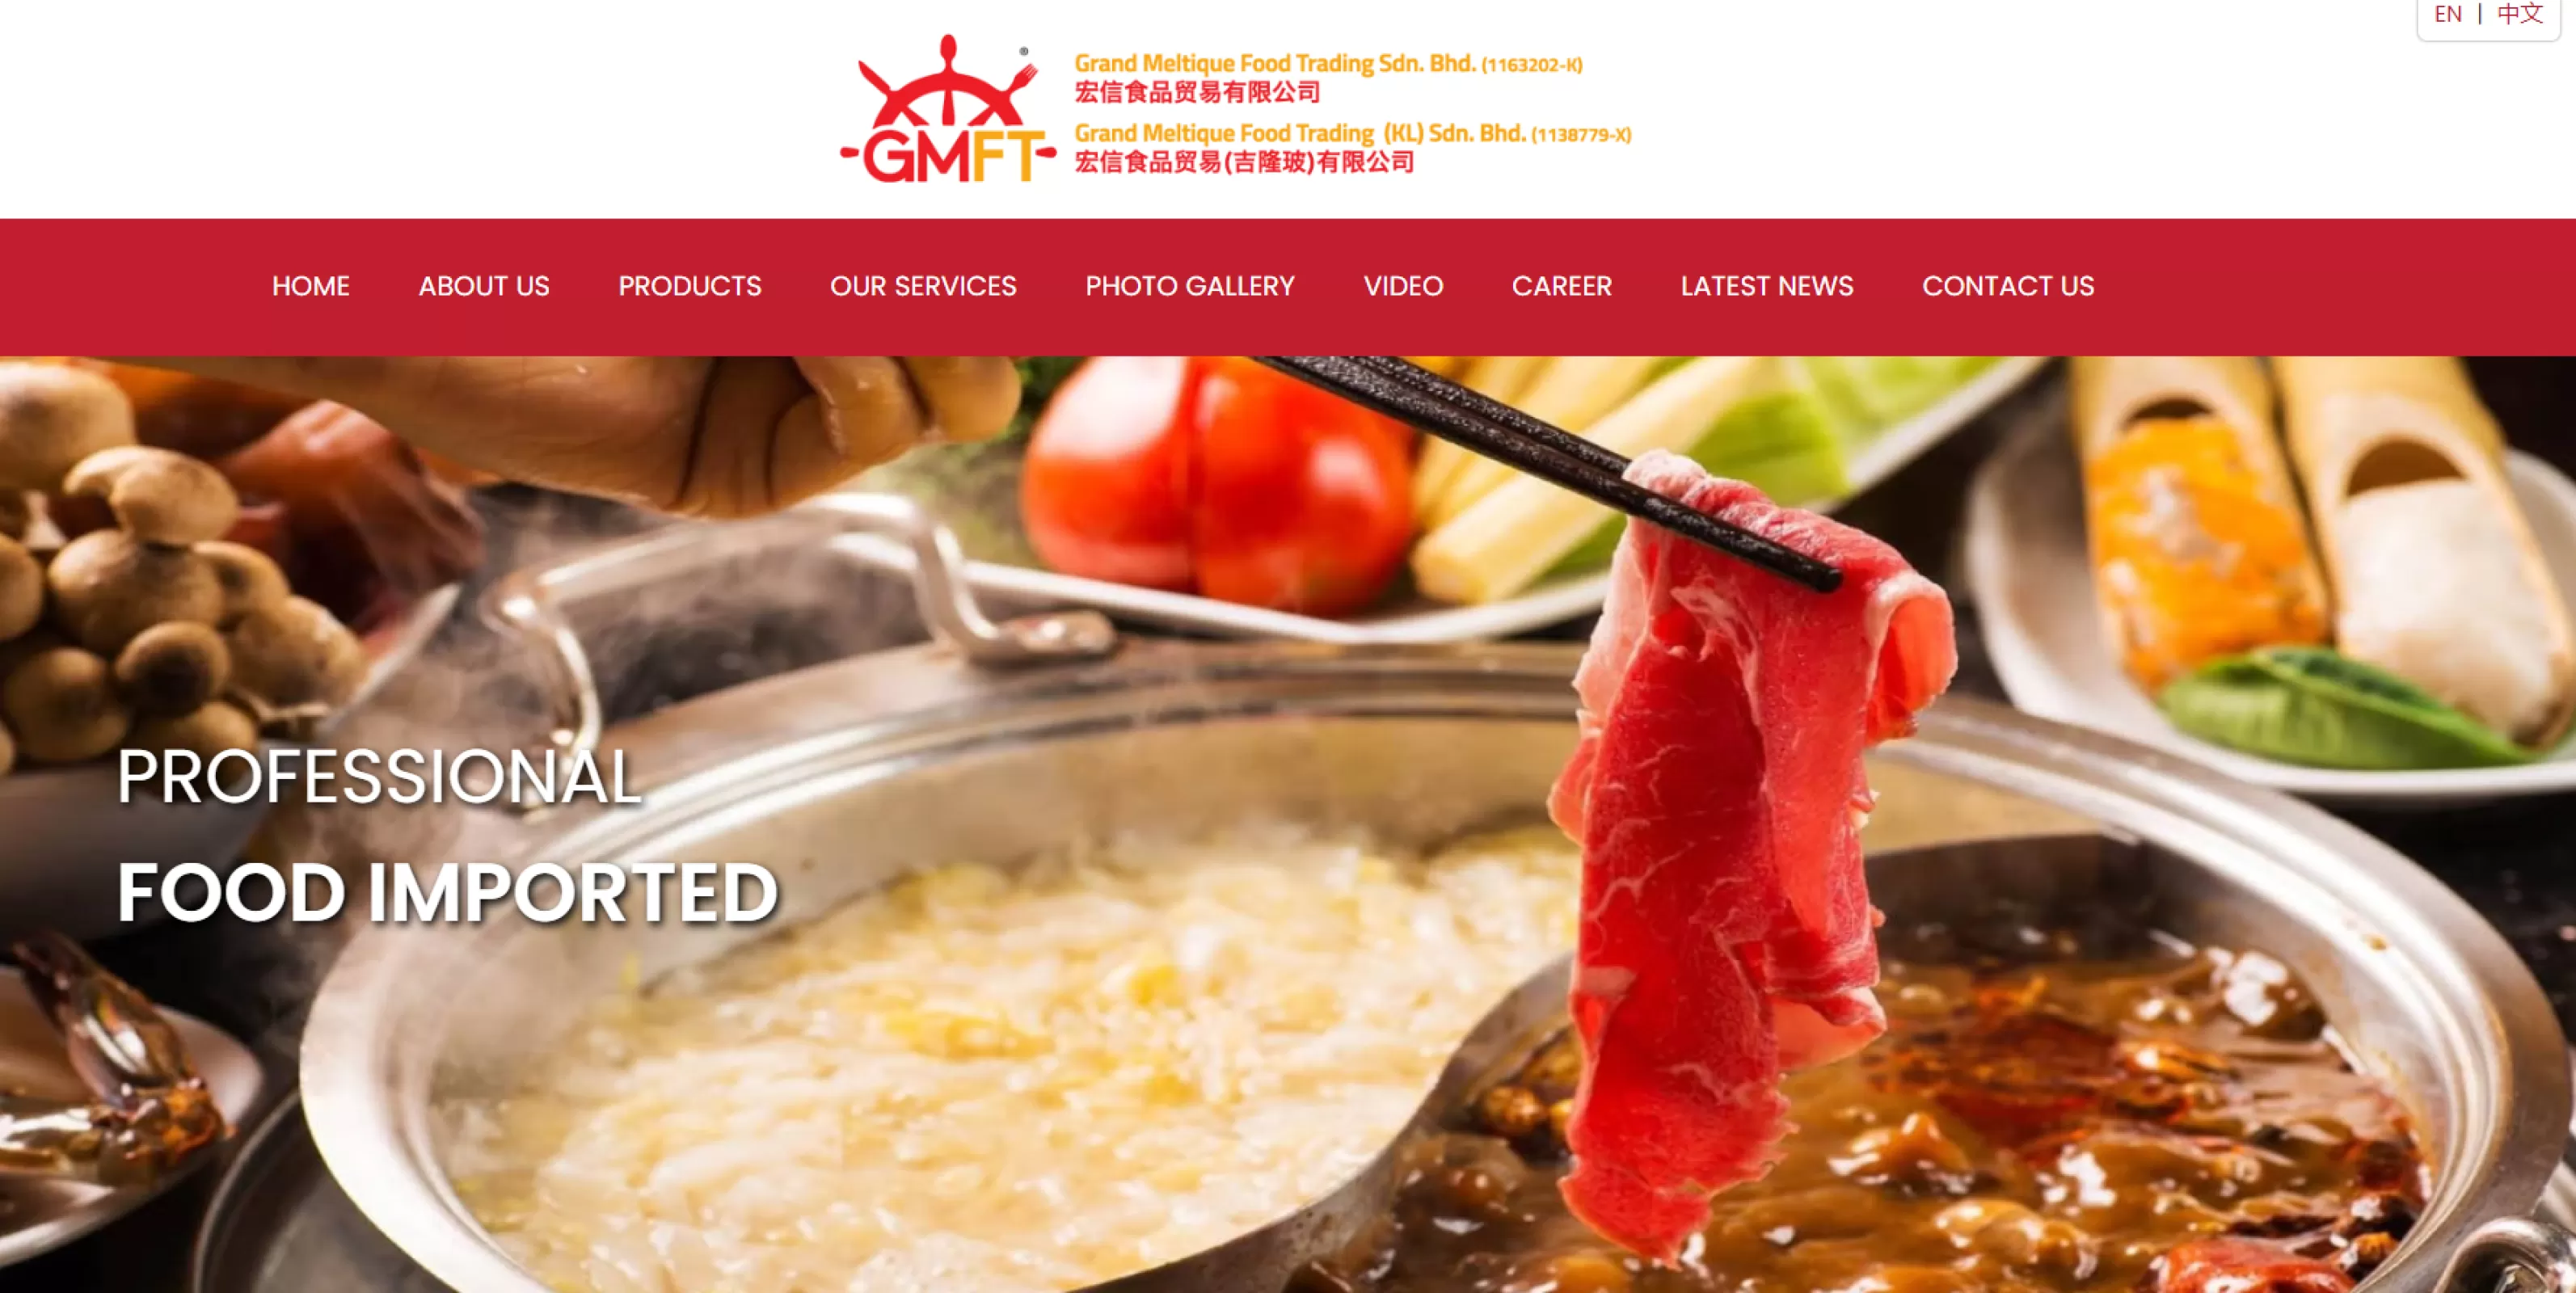 Grand Meltique Food Trading Sdn Bhd Website